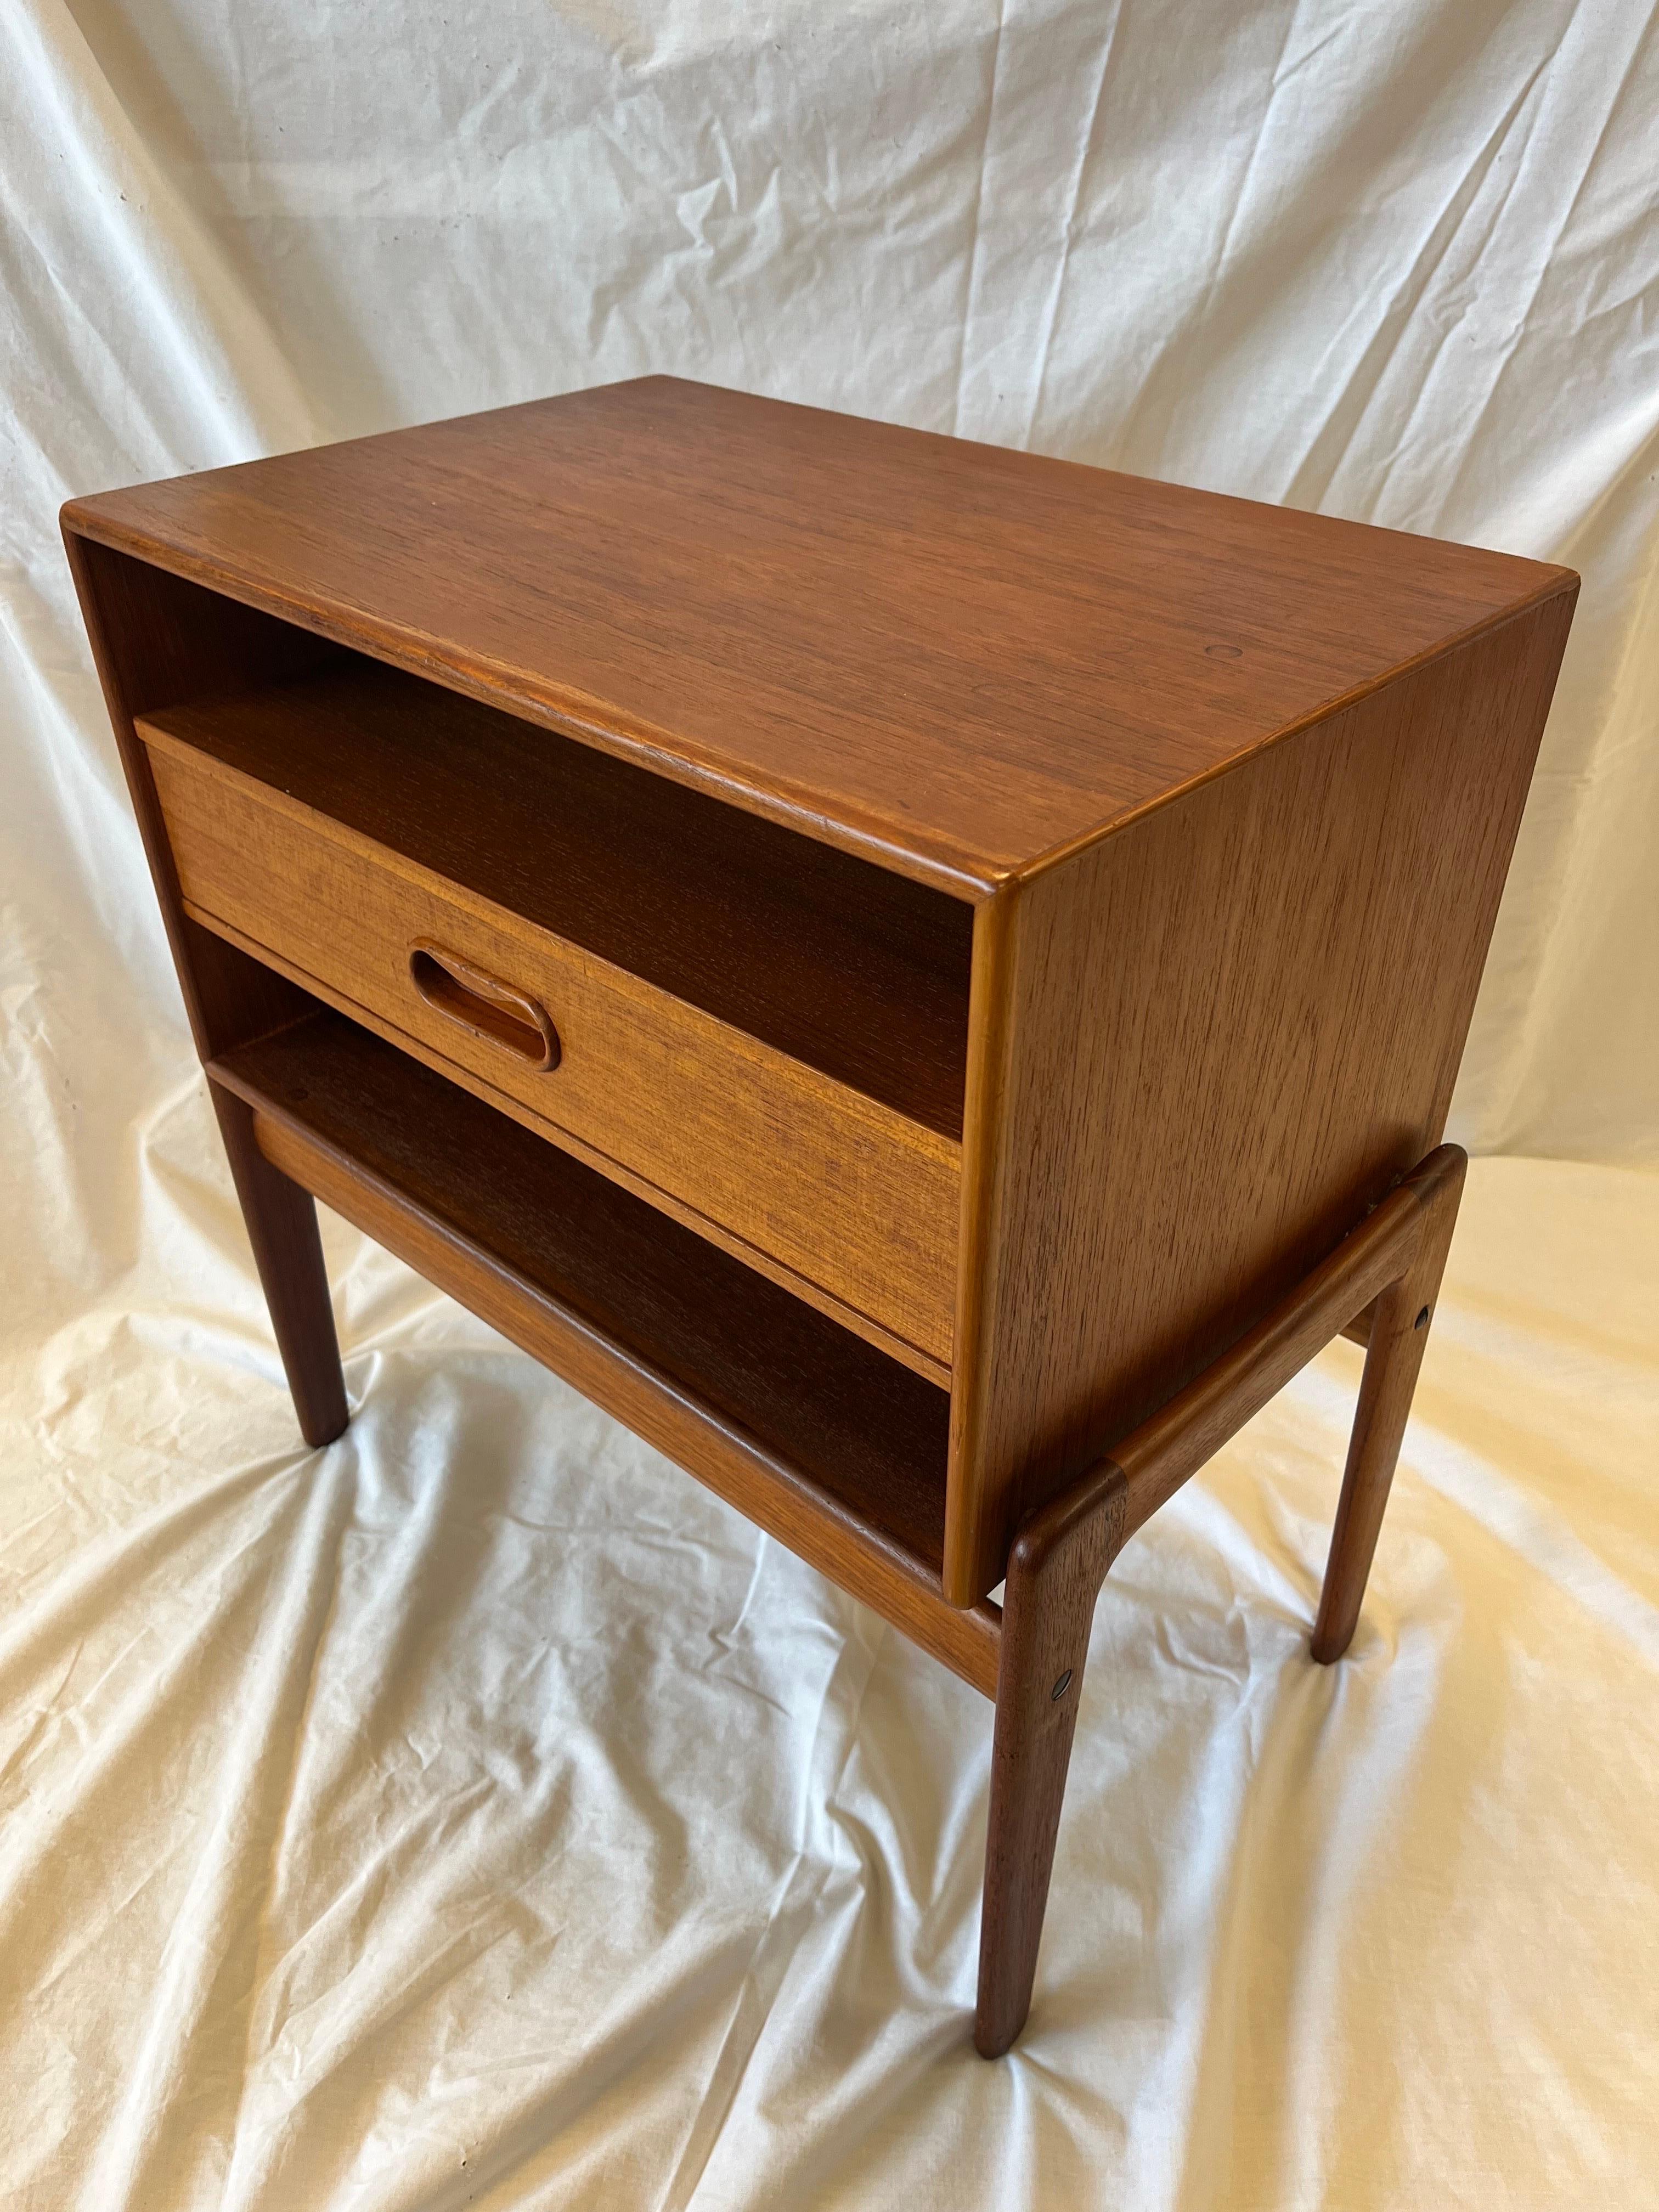 A vintage mid 20th century Danish modern nightstand (or side table or end table) designed by Arne Vodder (16 February 1926 – 27 December 2009 - was a Danish furniture designer, a close friend and partner of Finn Juhl who had been his teacher) for